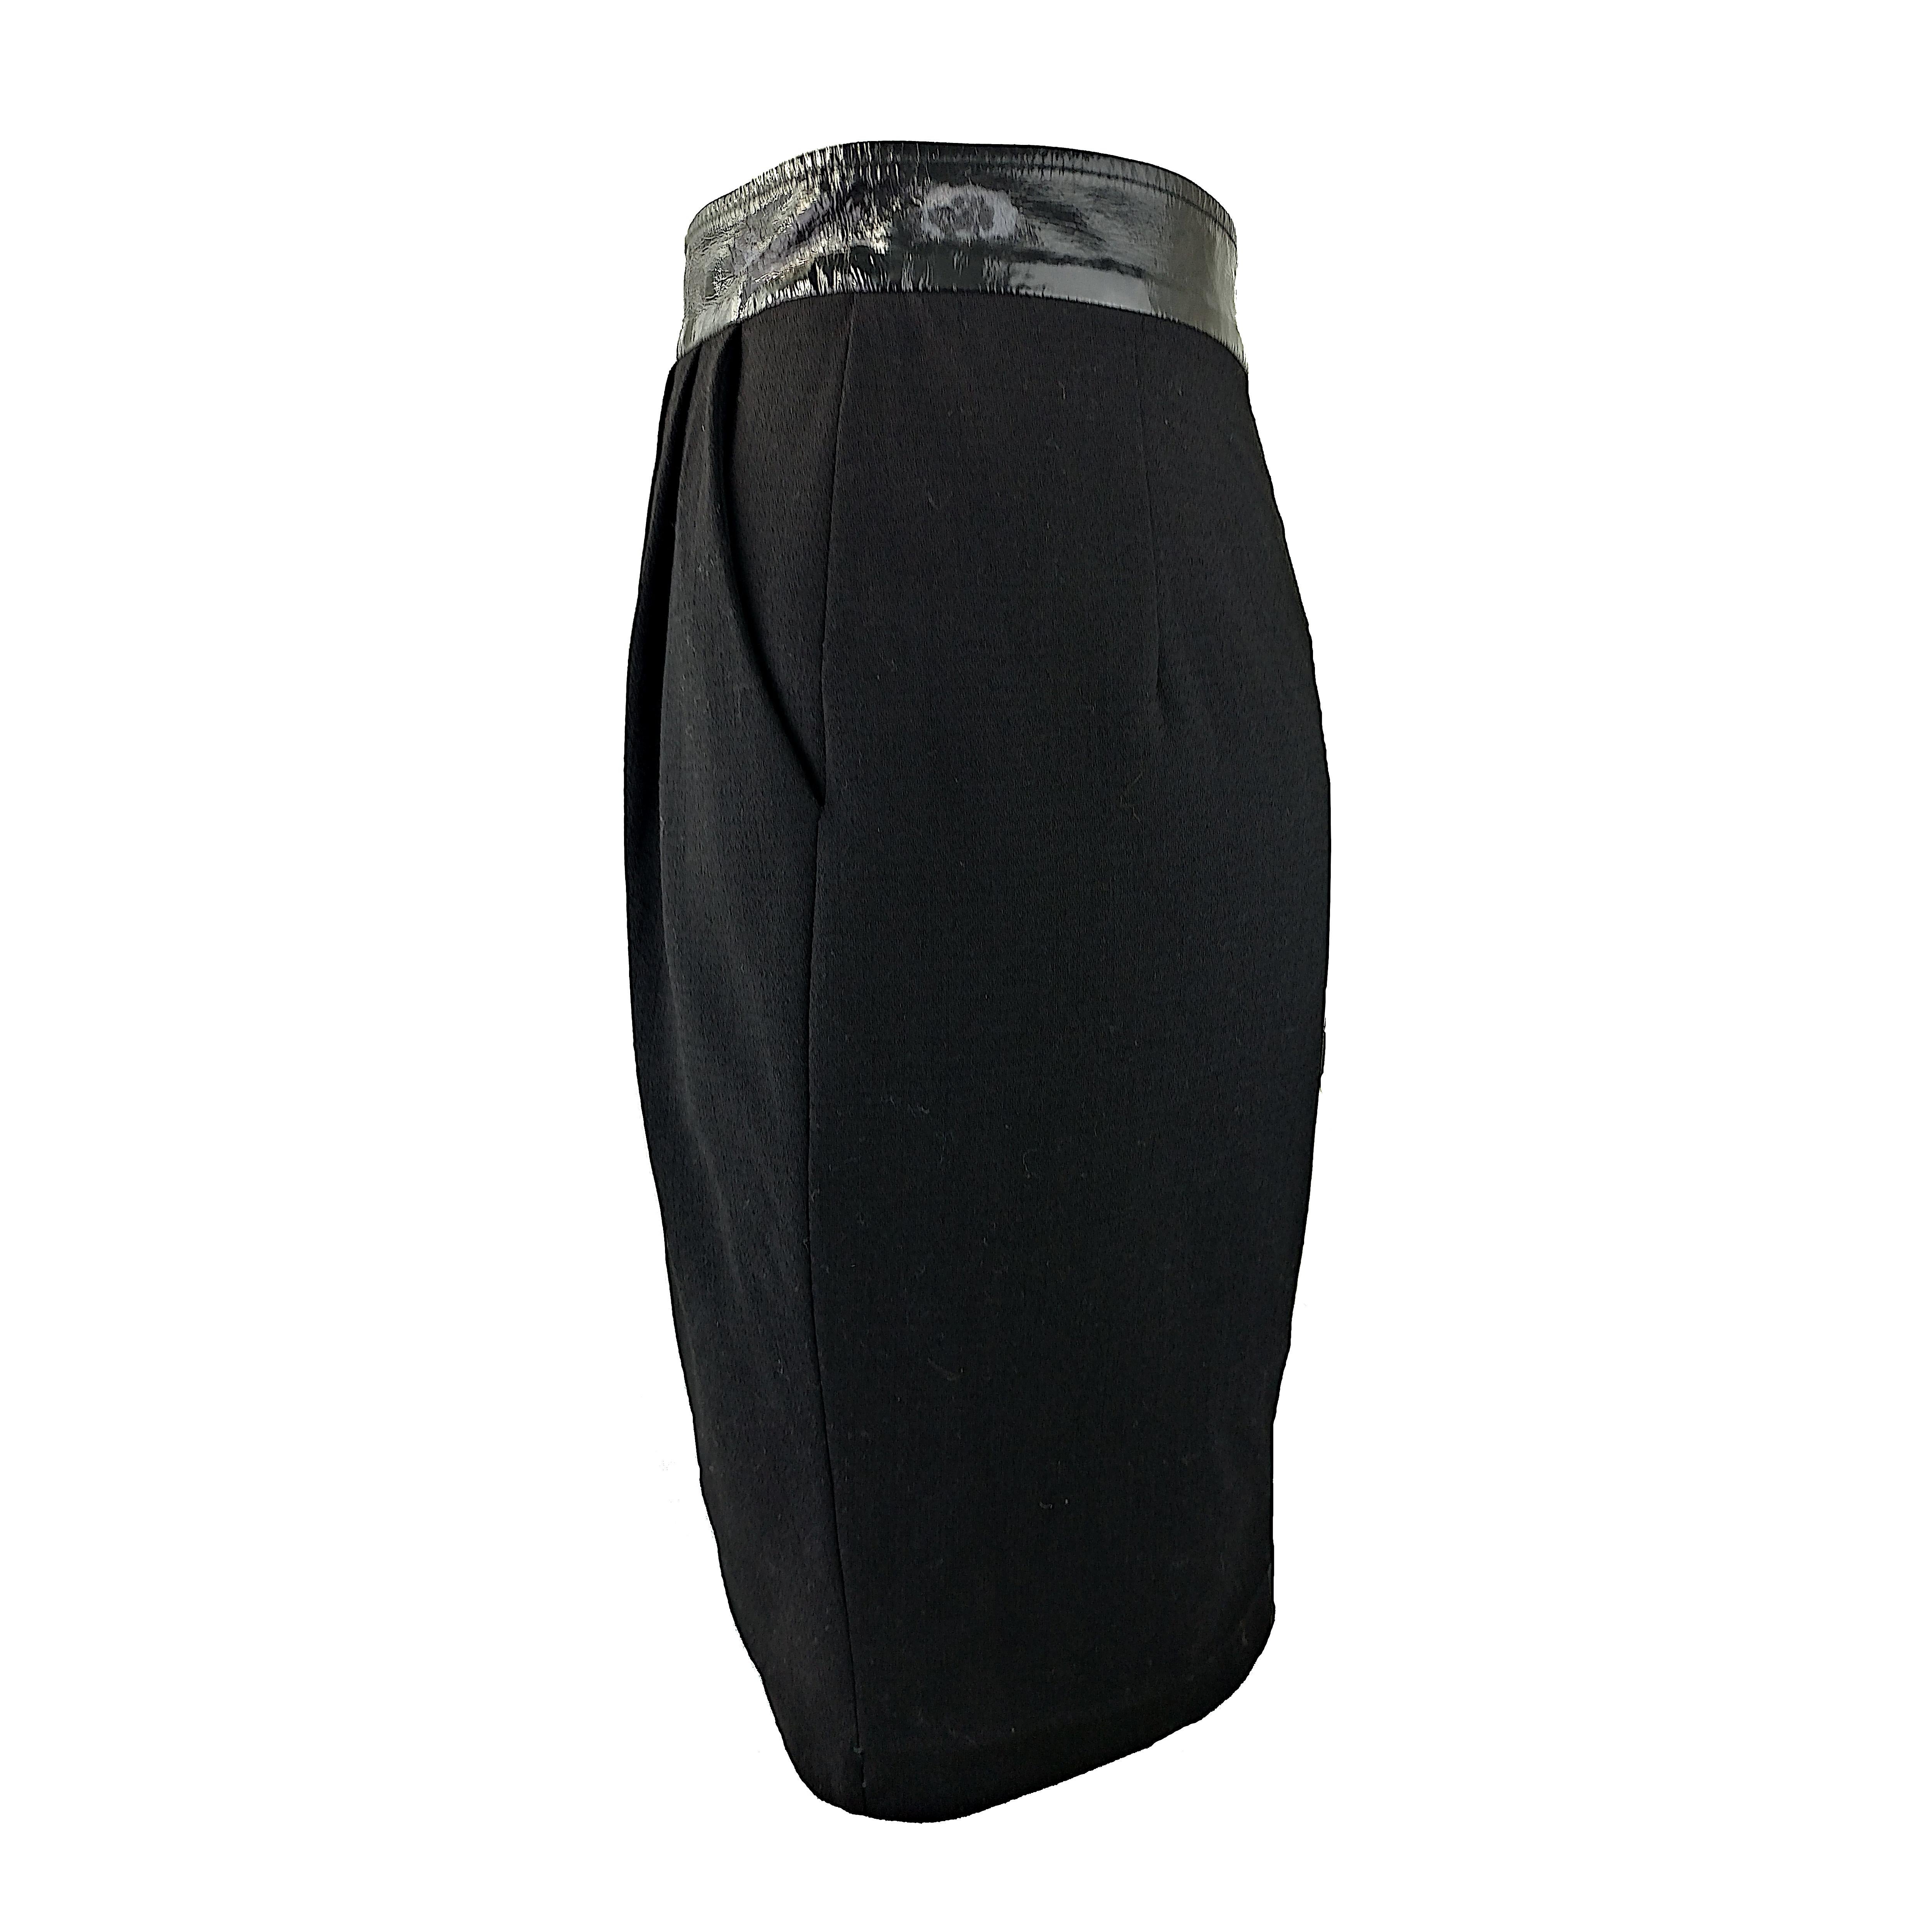 Dolce & Gabbana - 90s Vintage Black Wool Skirt with Latex Belt  Size 6US 38EU In Fair Condition For Sale In Cuggiono, MI